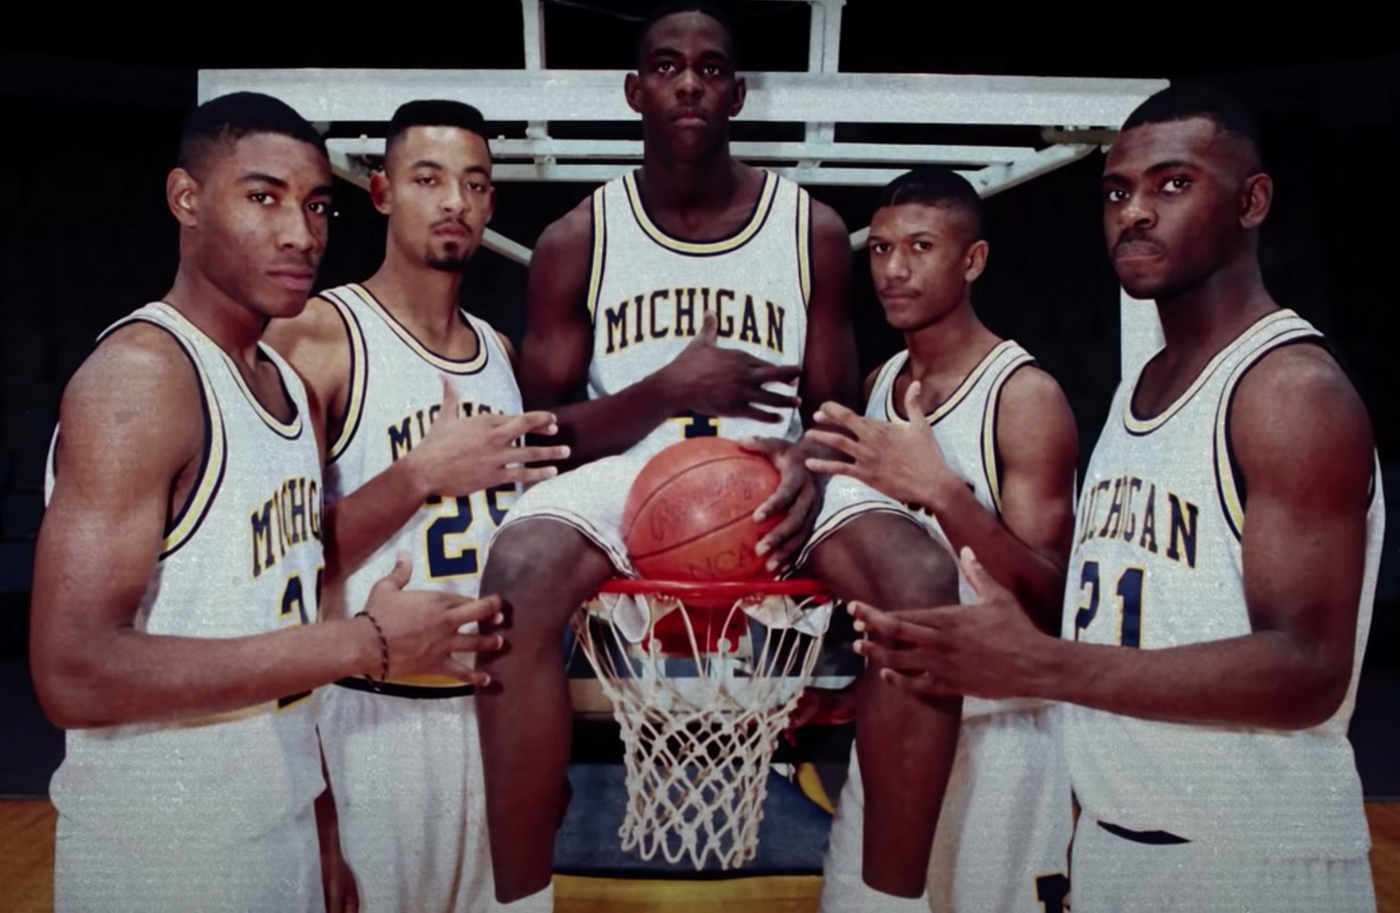 The Continued Saga of Chris Webber and The Fab Five, by AJ Wiseman, Wiseman Once Said